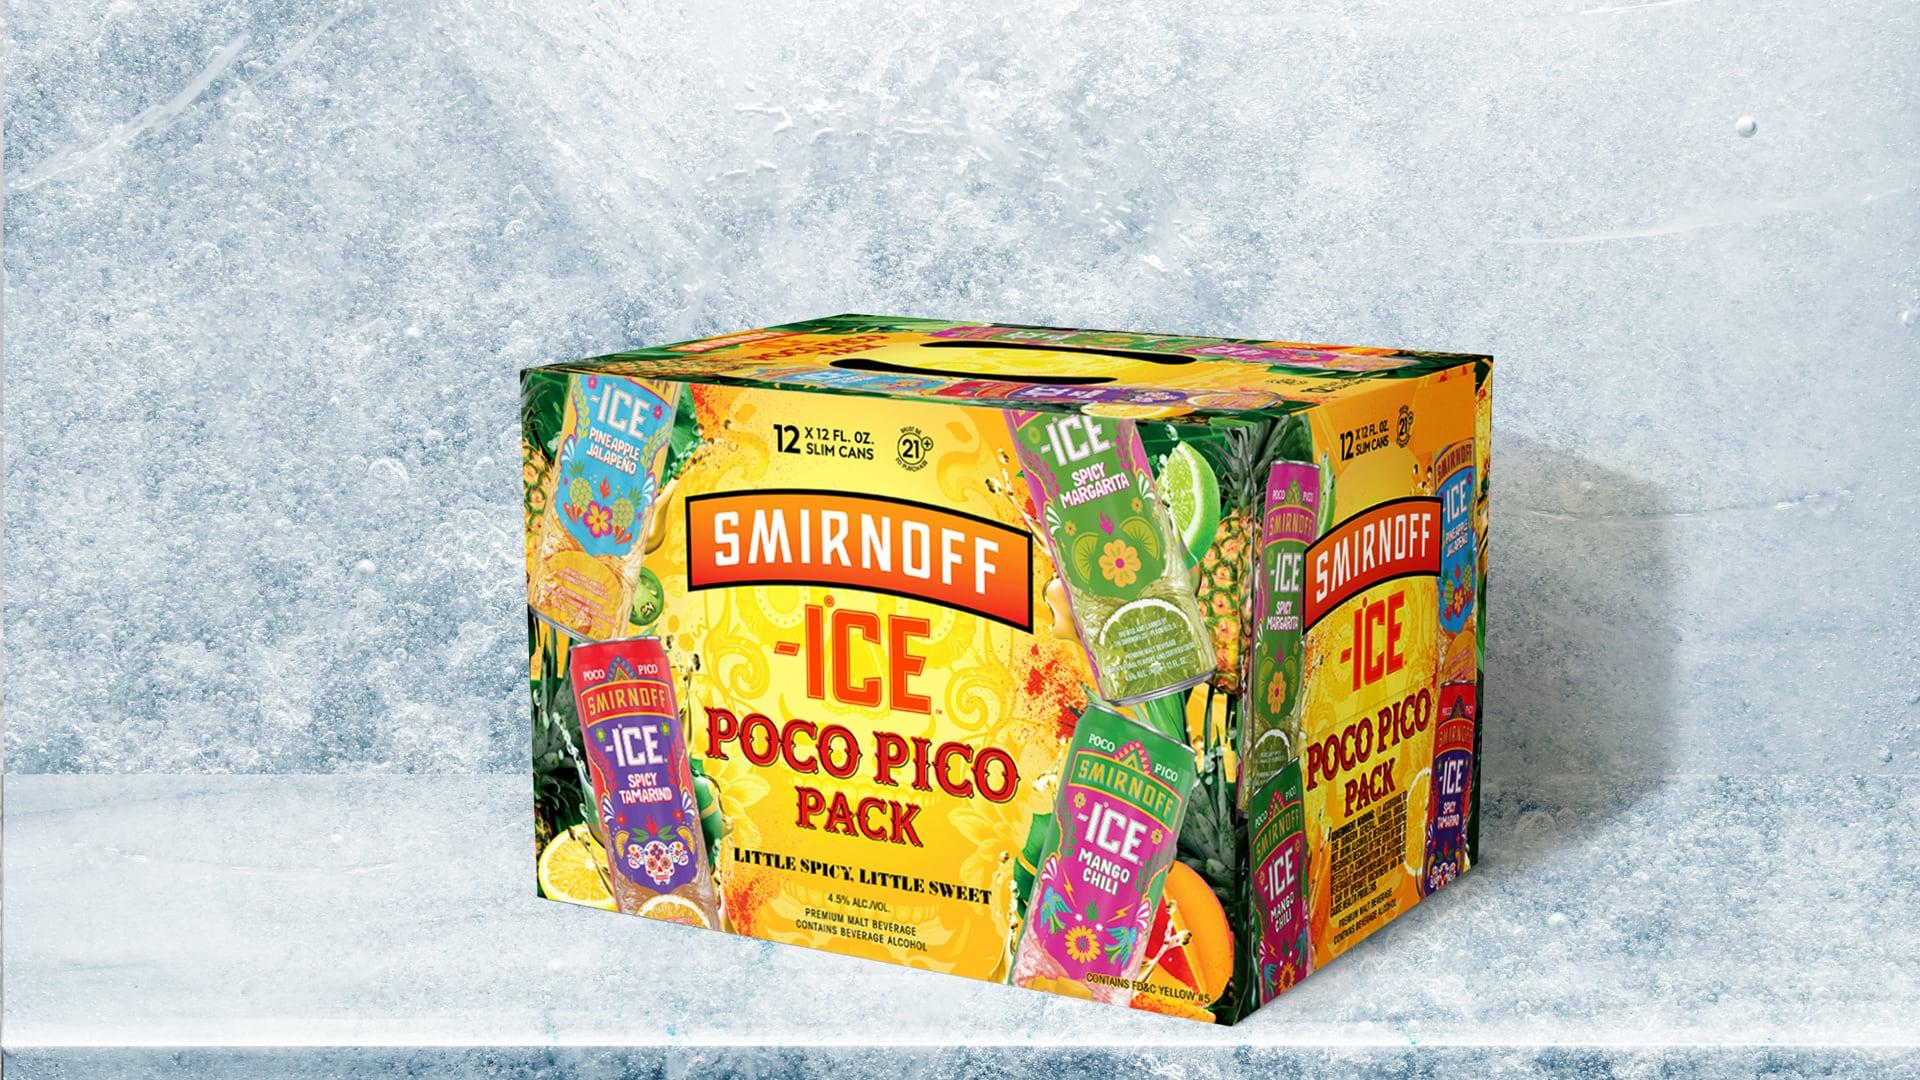 Smirnoff Ice Poco Pico Variety Pack on an Icy background